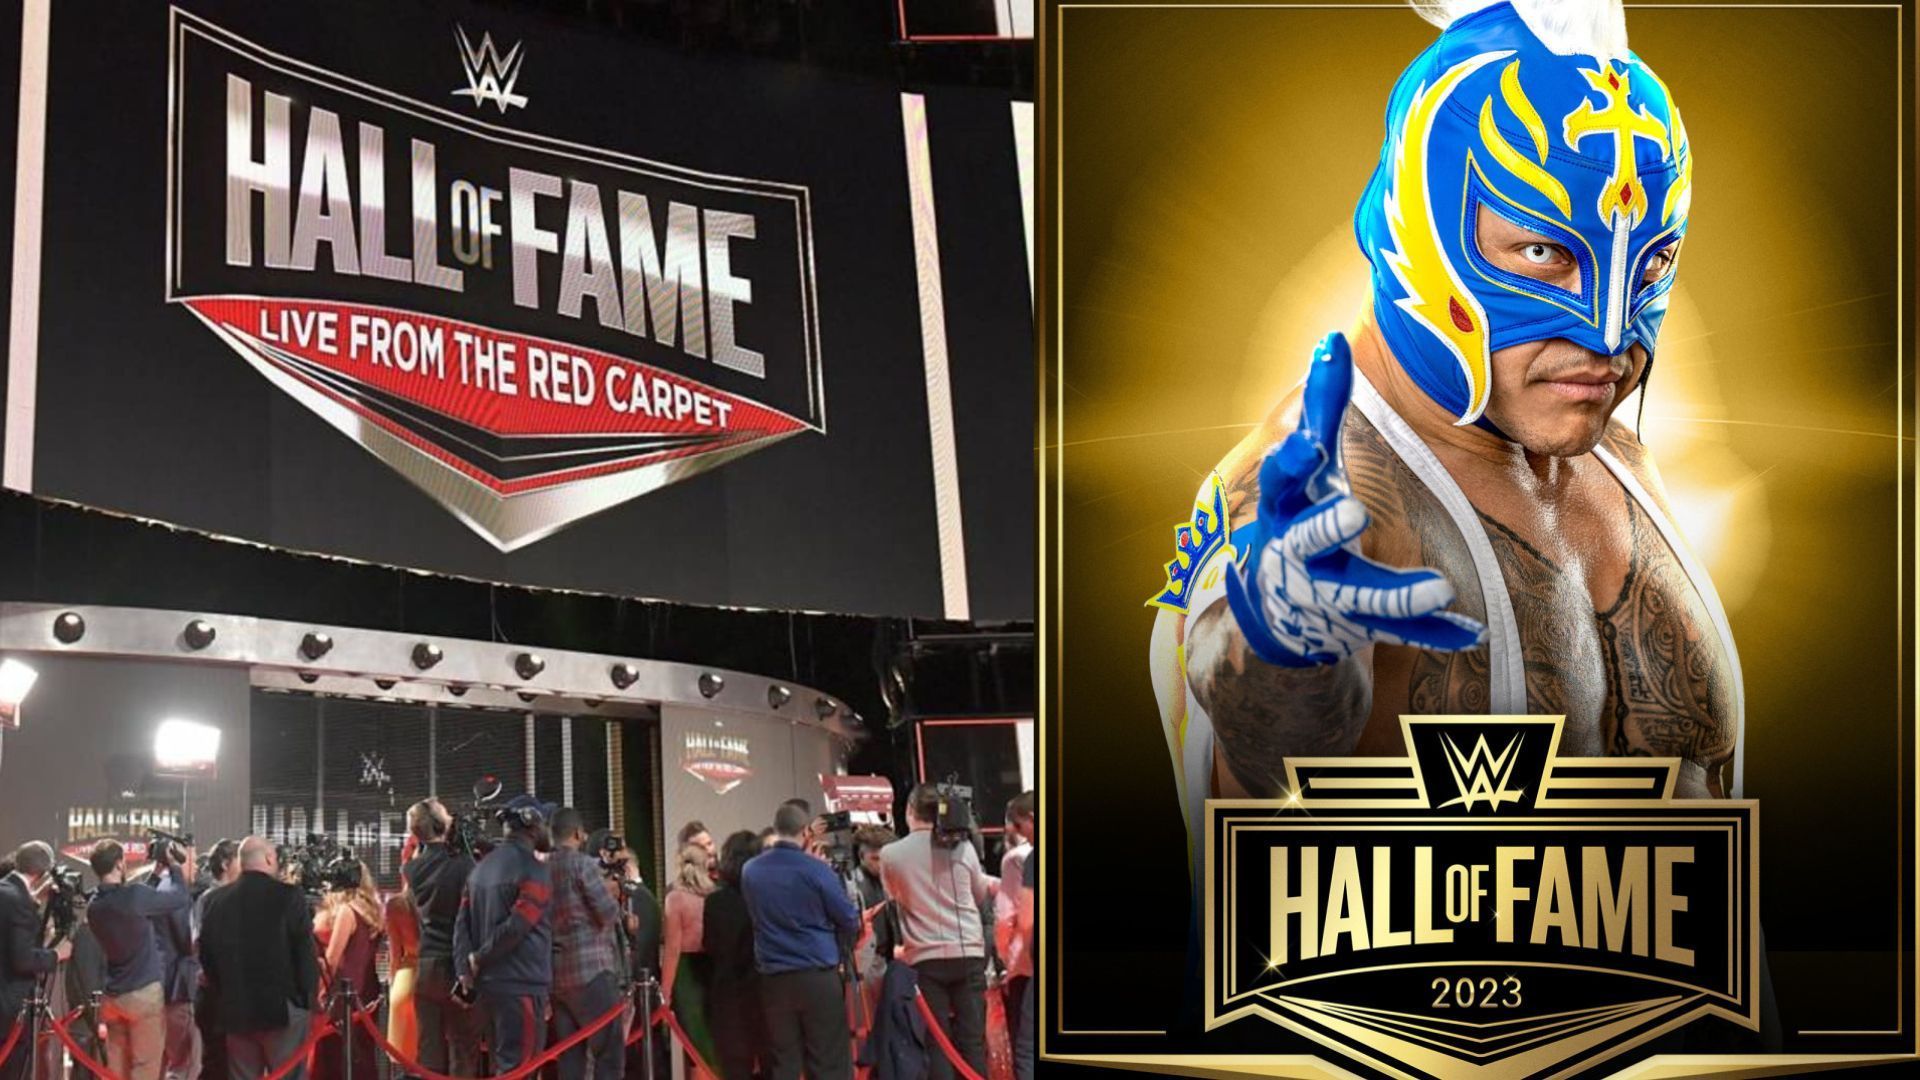 WWE Hall of Fame 2023 currently has four confirmed stars in their list